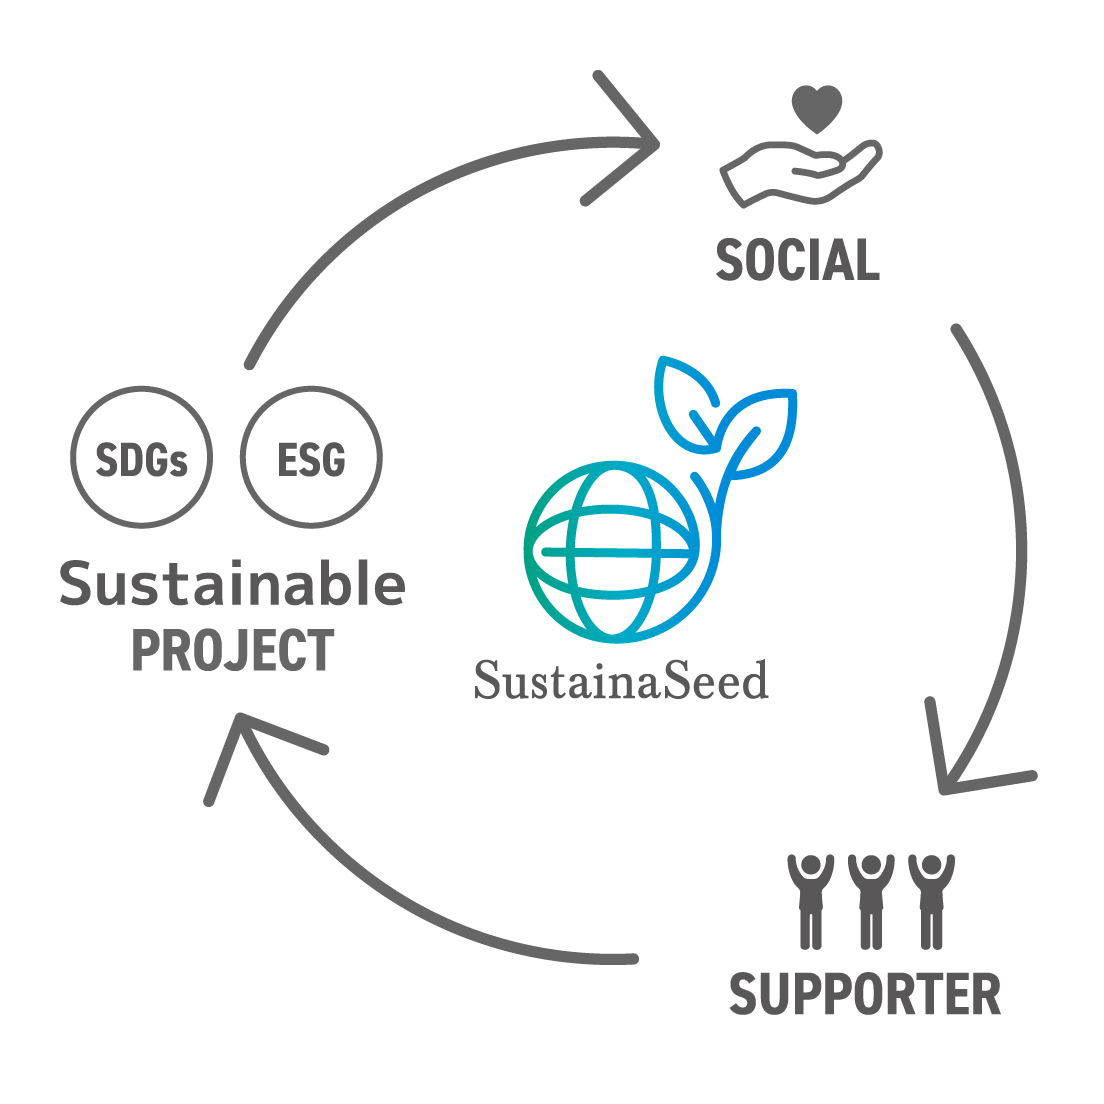 SustainaSeed SOCIAL SUPPORTER SustainableProject